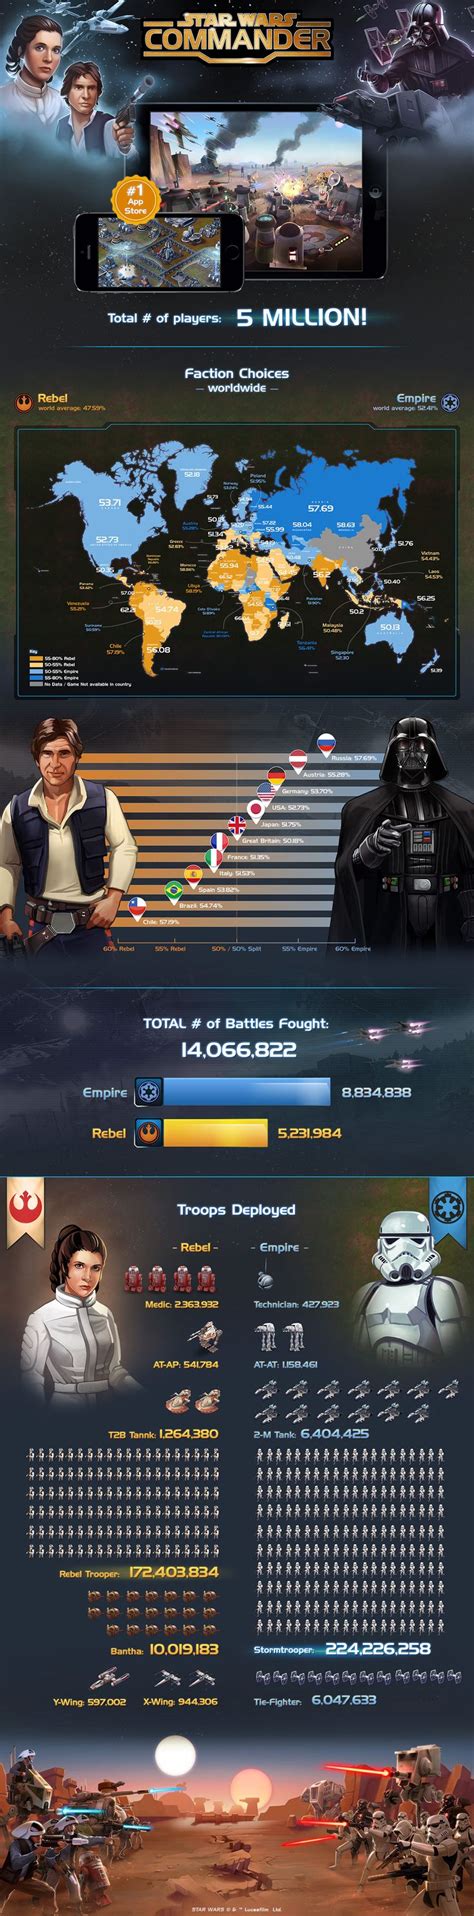 Star Wars Commander Star Wars Infographic Infographic Examples